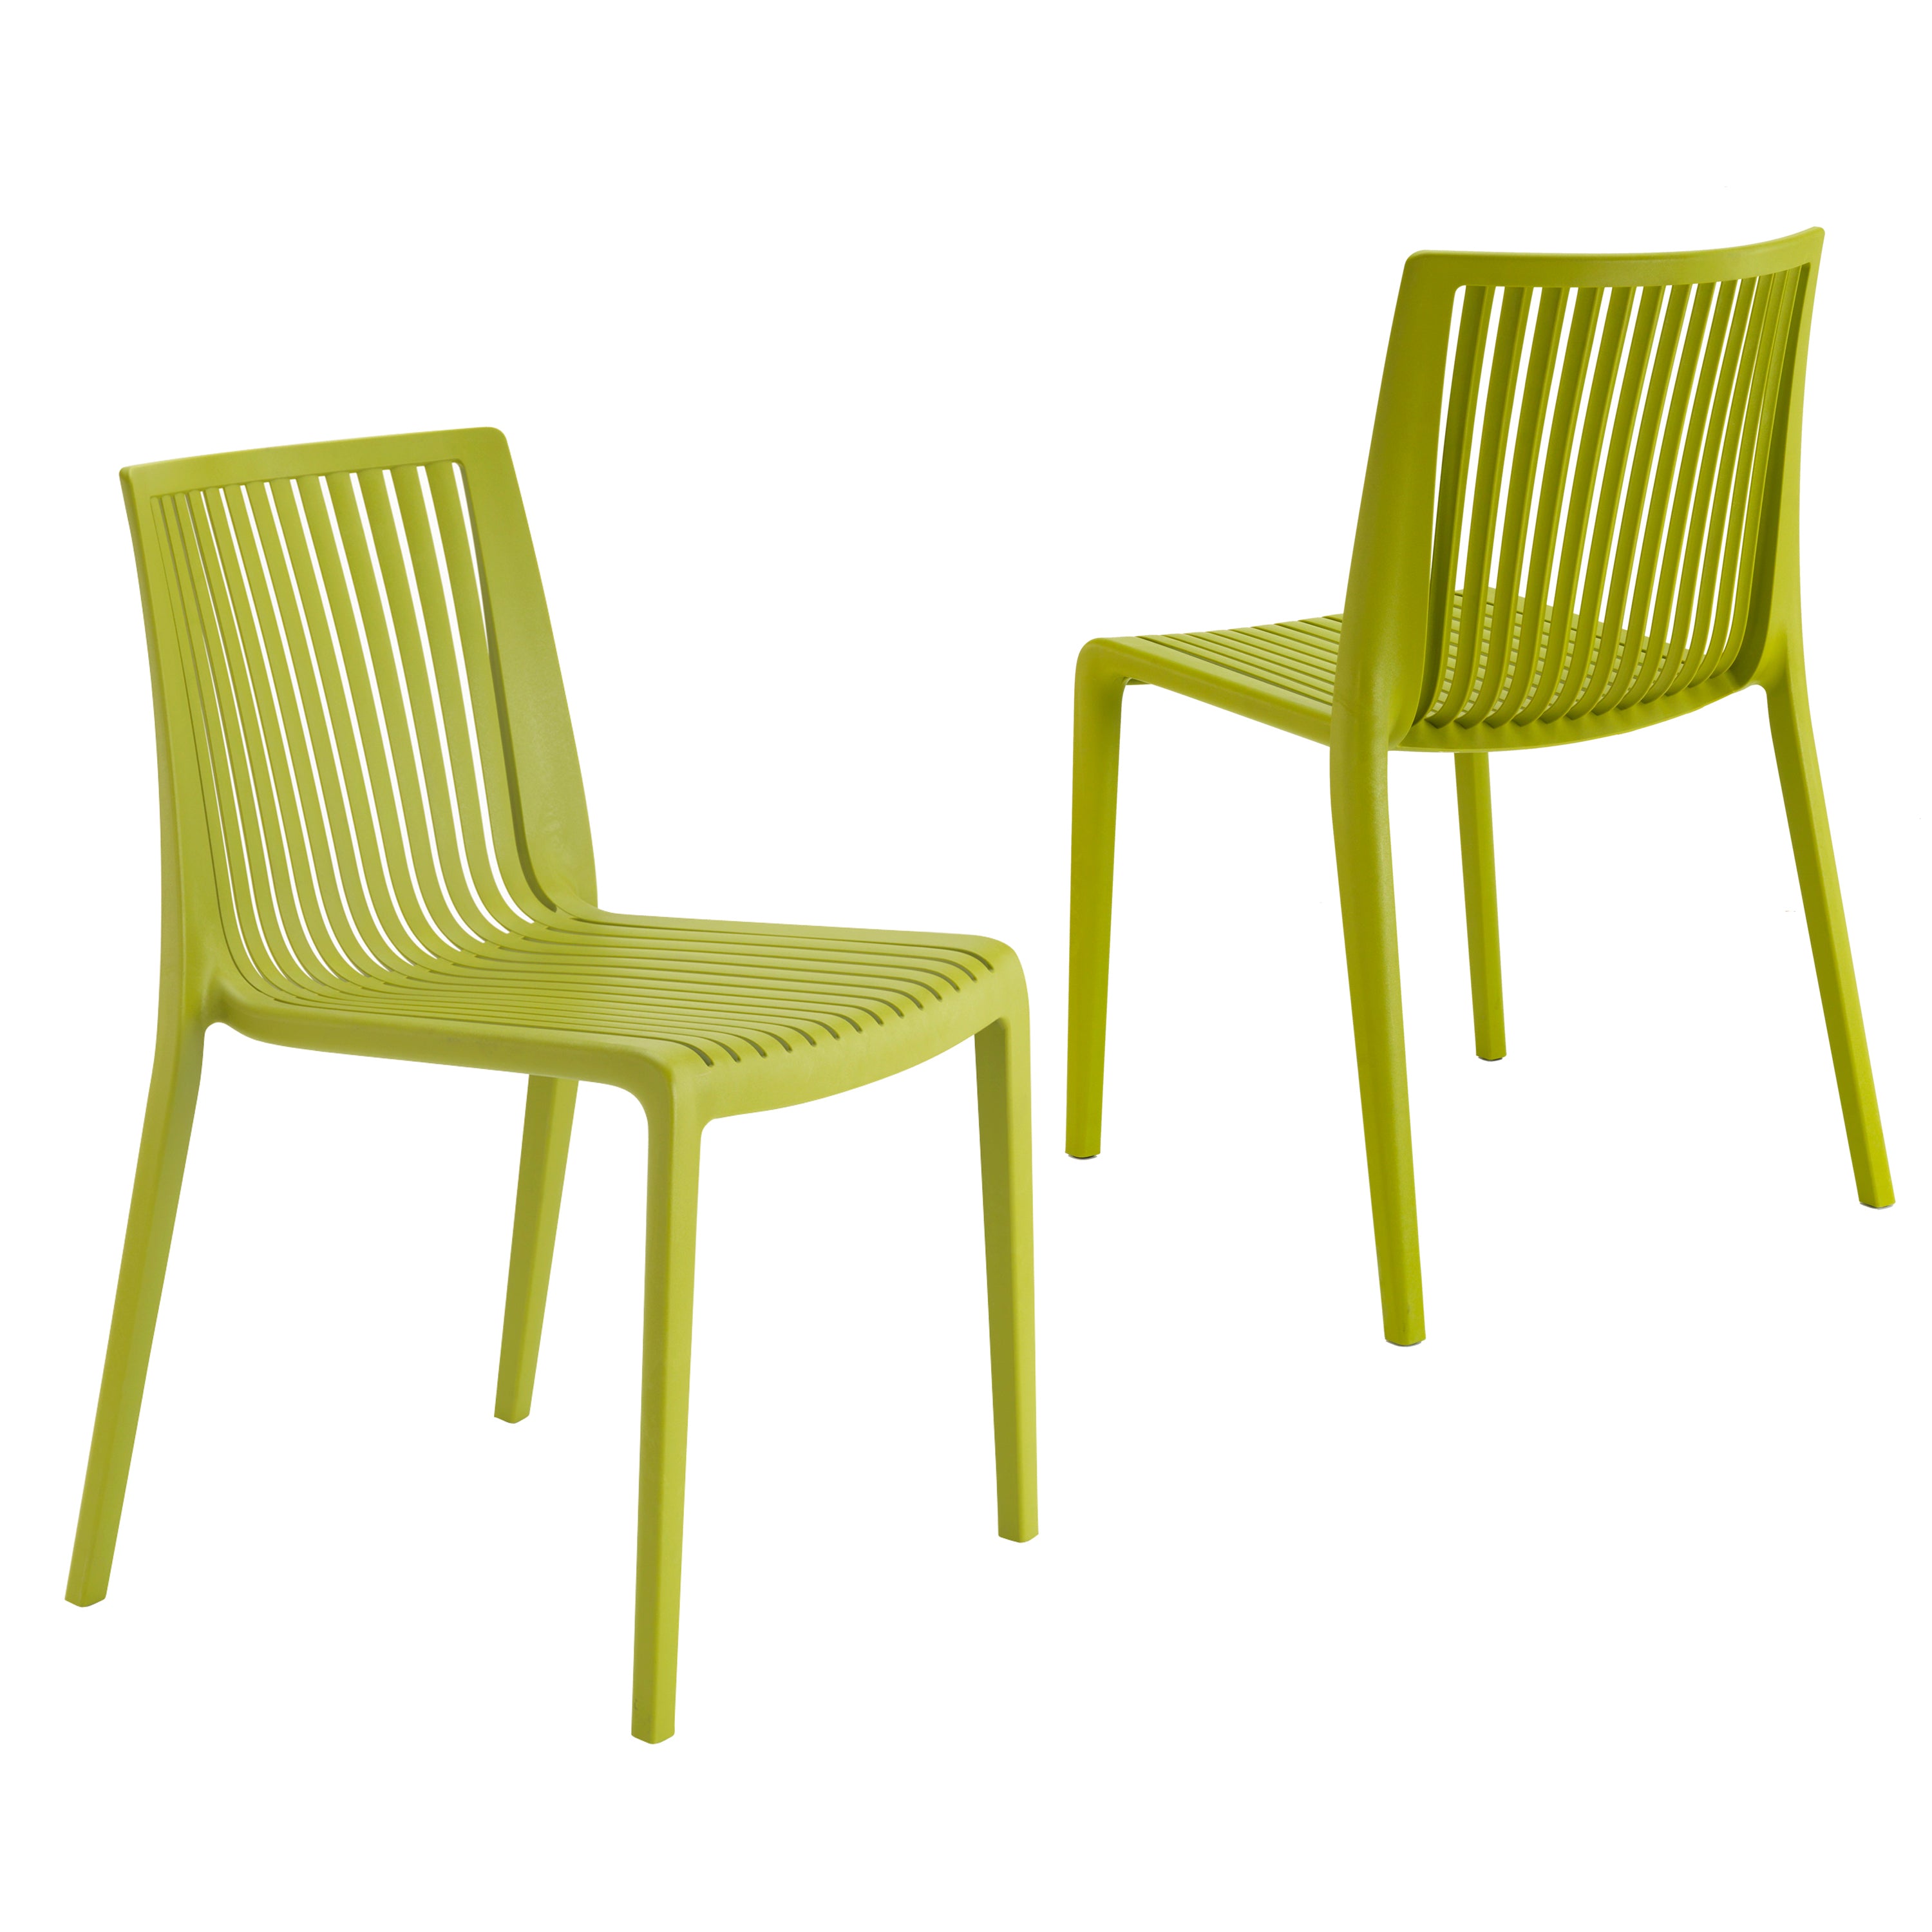 Nox Patio Stackable Dining Chair in Green - (Set of 2)